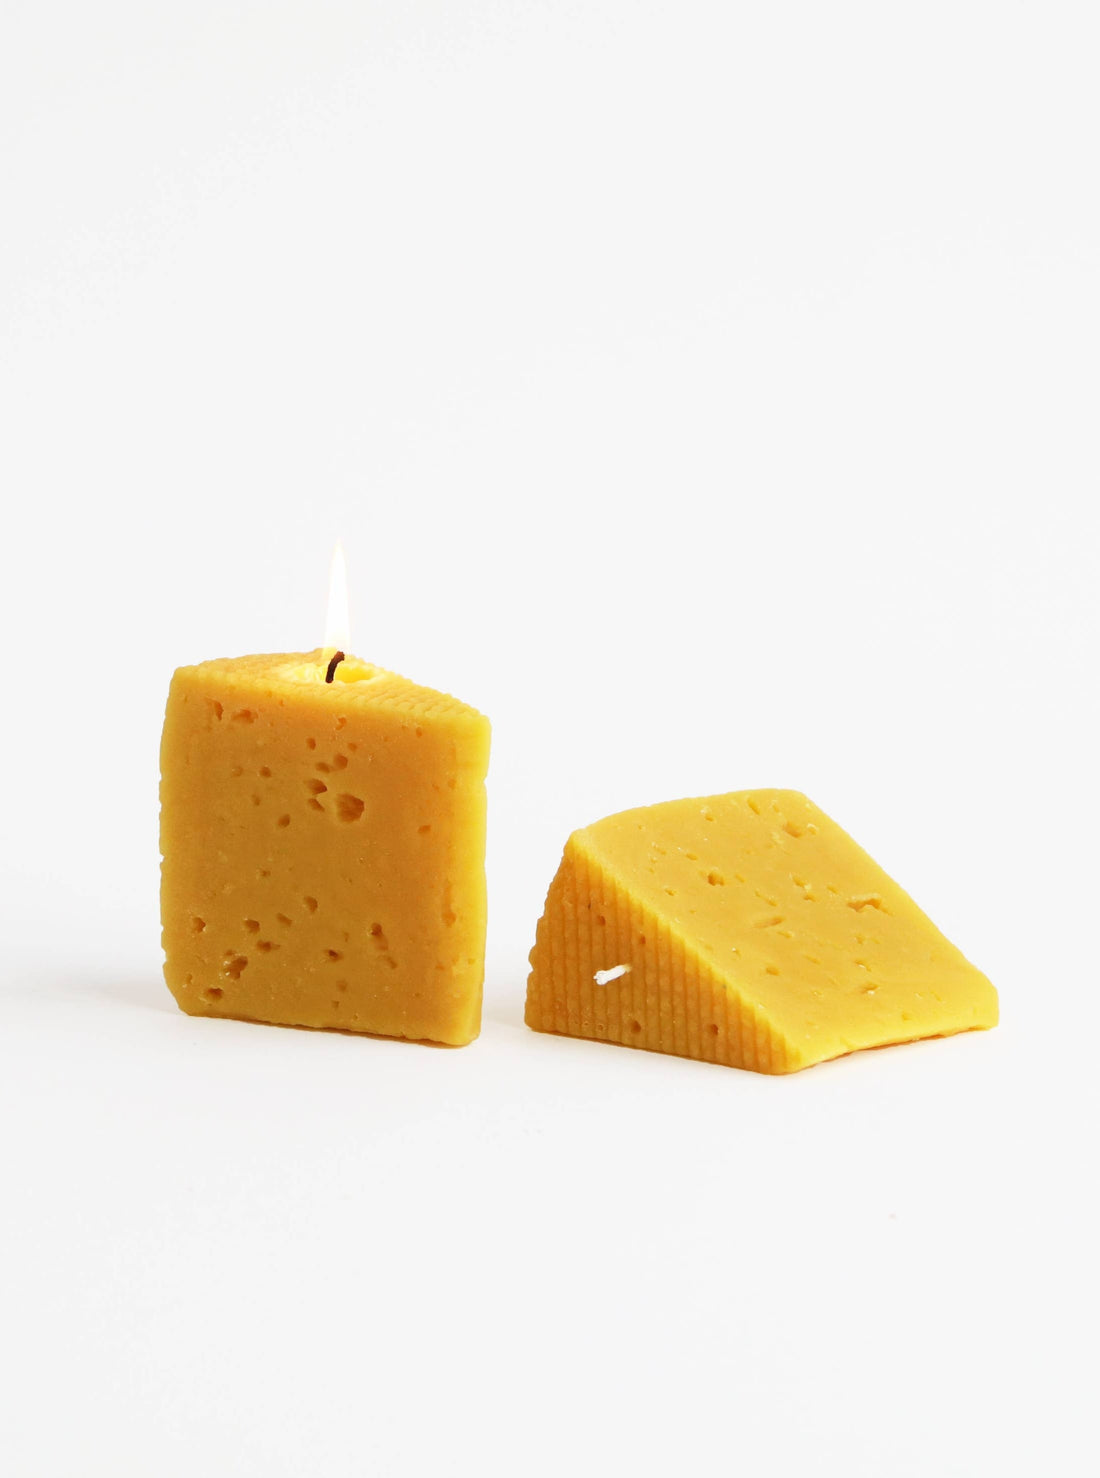 Blue Cheese Beeswax Candle